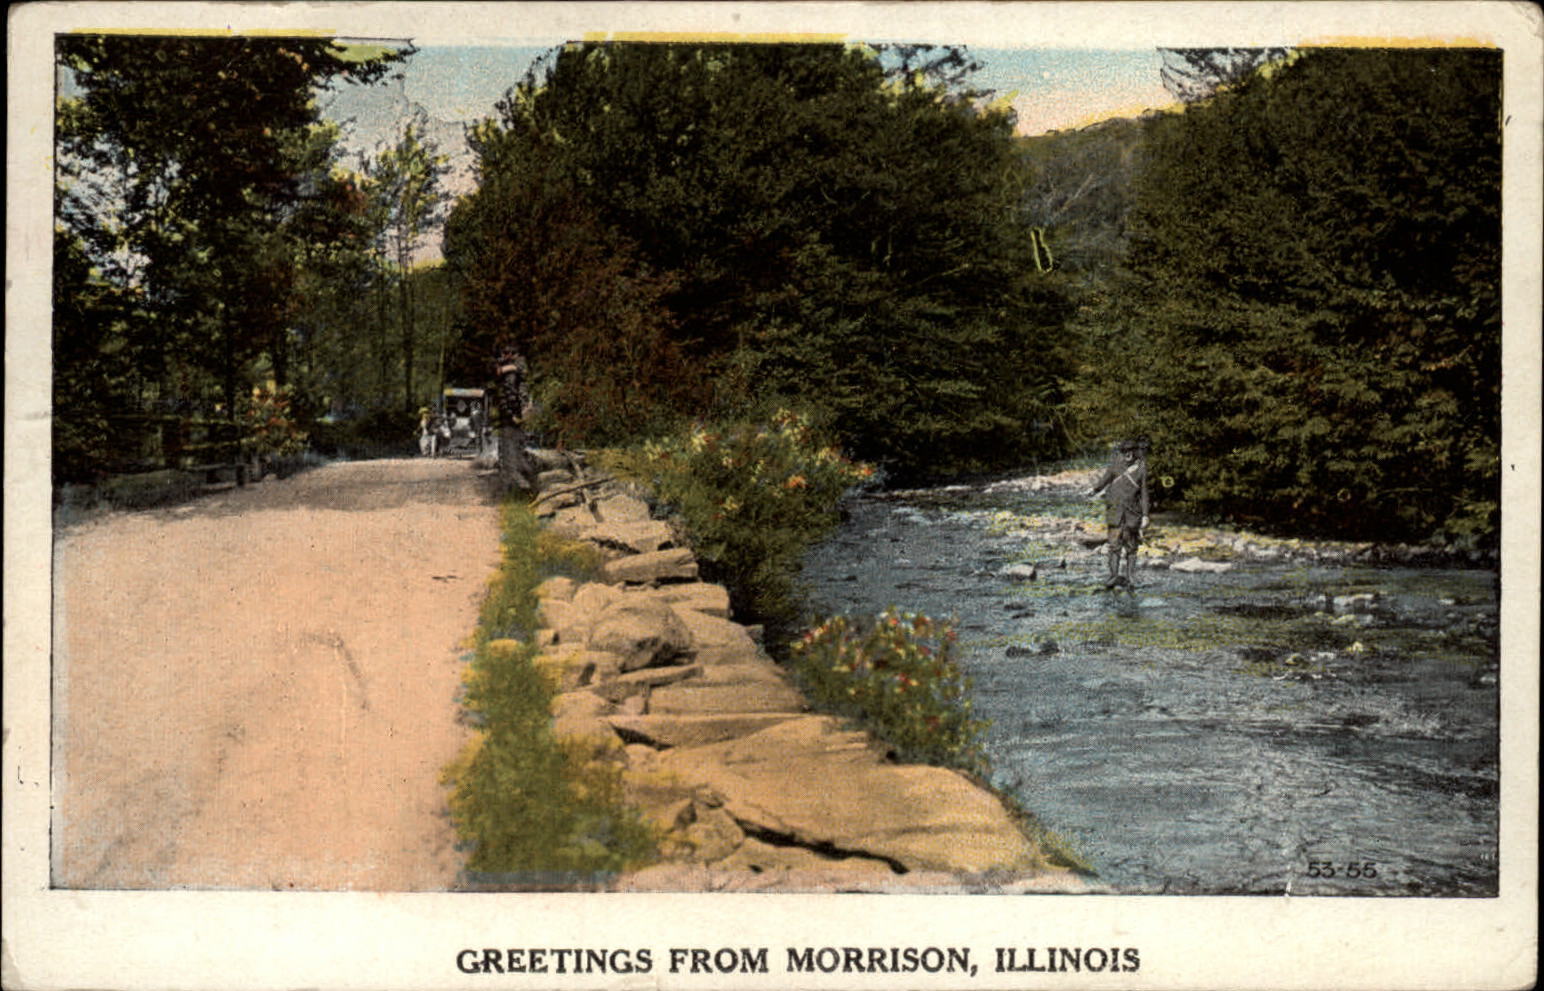 Greetings from Morrison Illinois stream fishing antique car ~ 1920s postcard